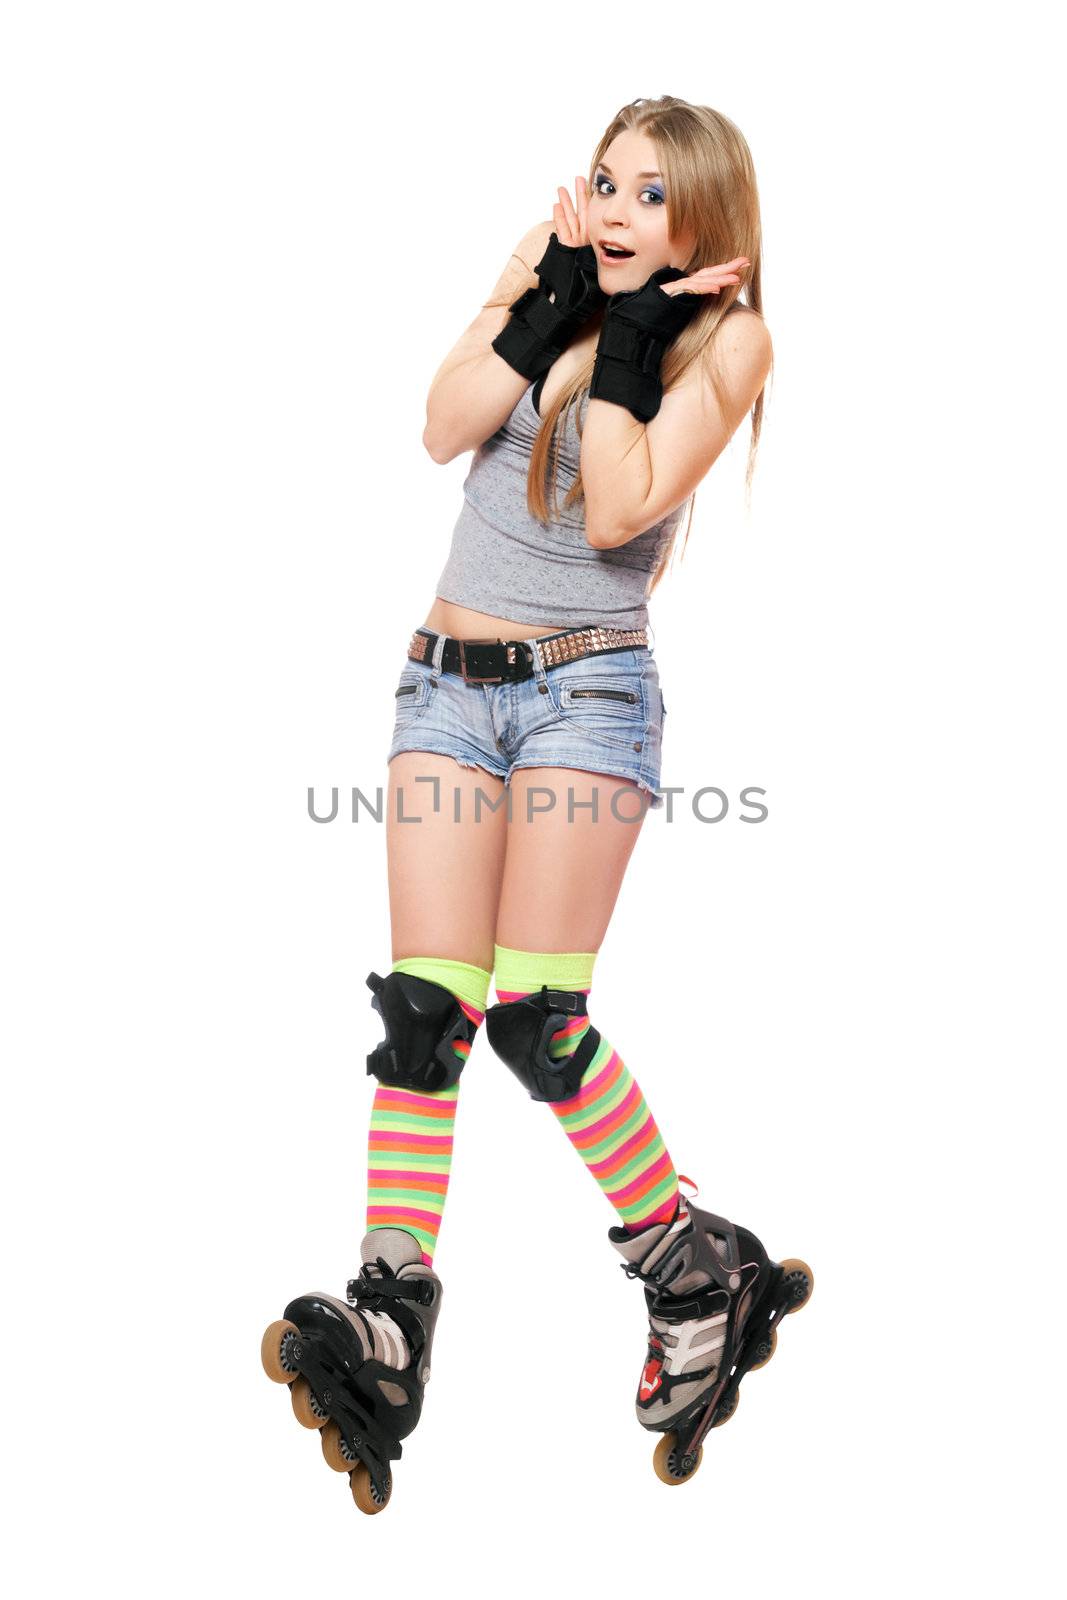 Scared girl tries to keep his balance on roller skates